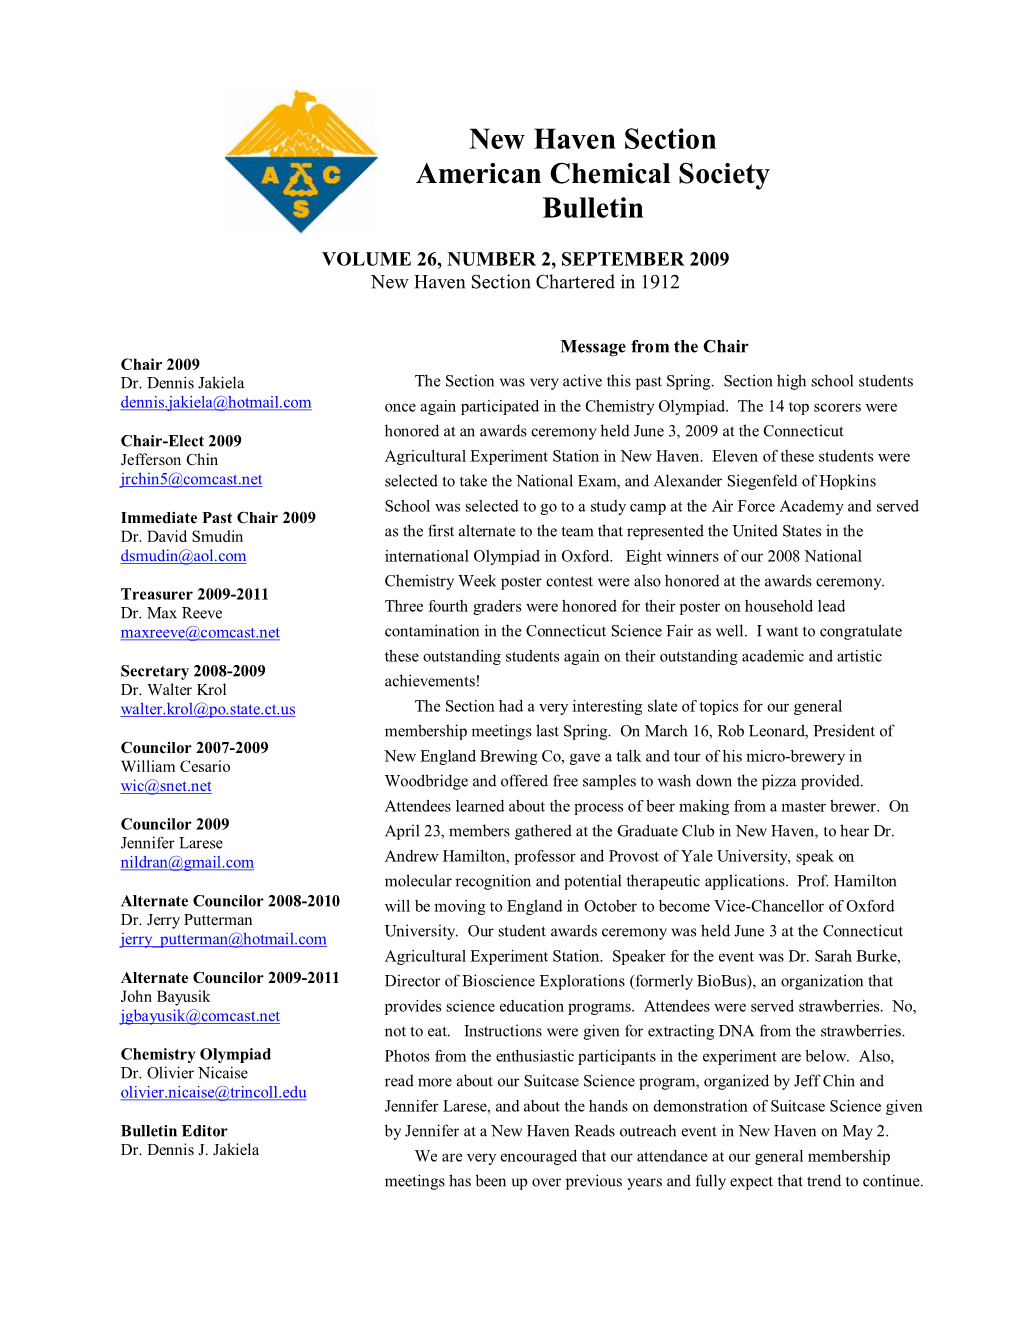 New Haven Section American Chemical Society Bulletin